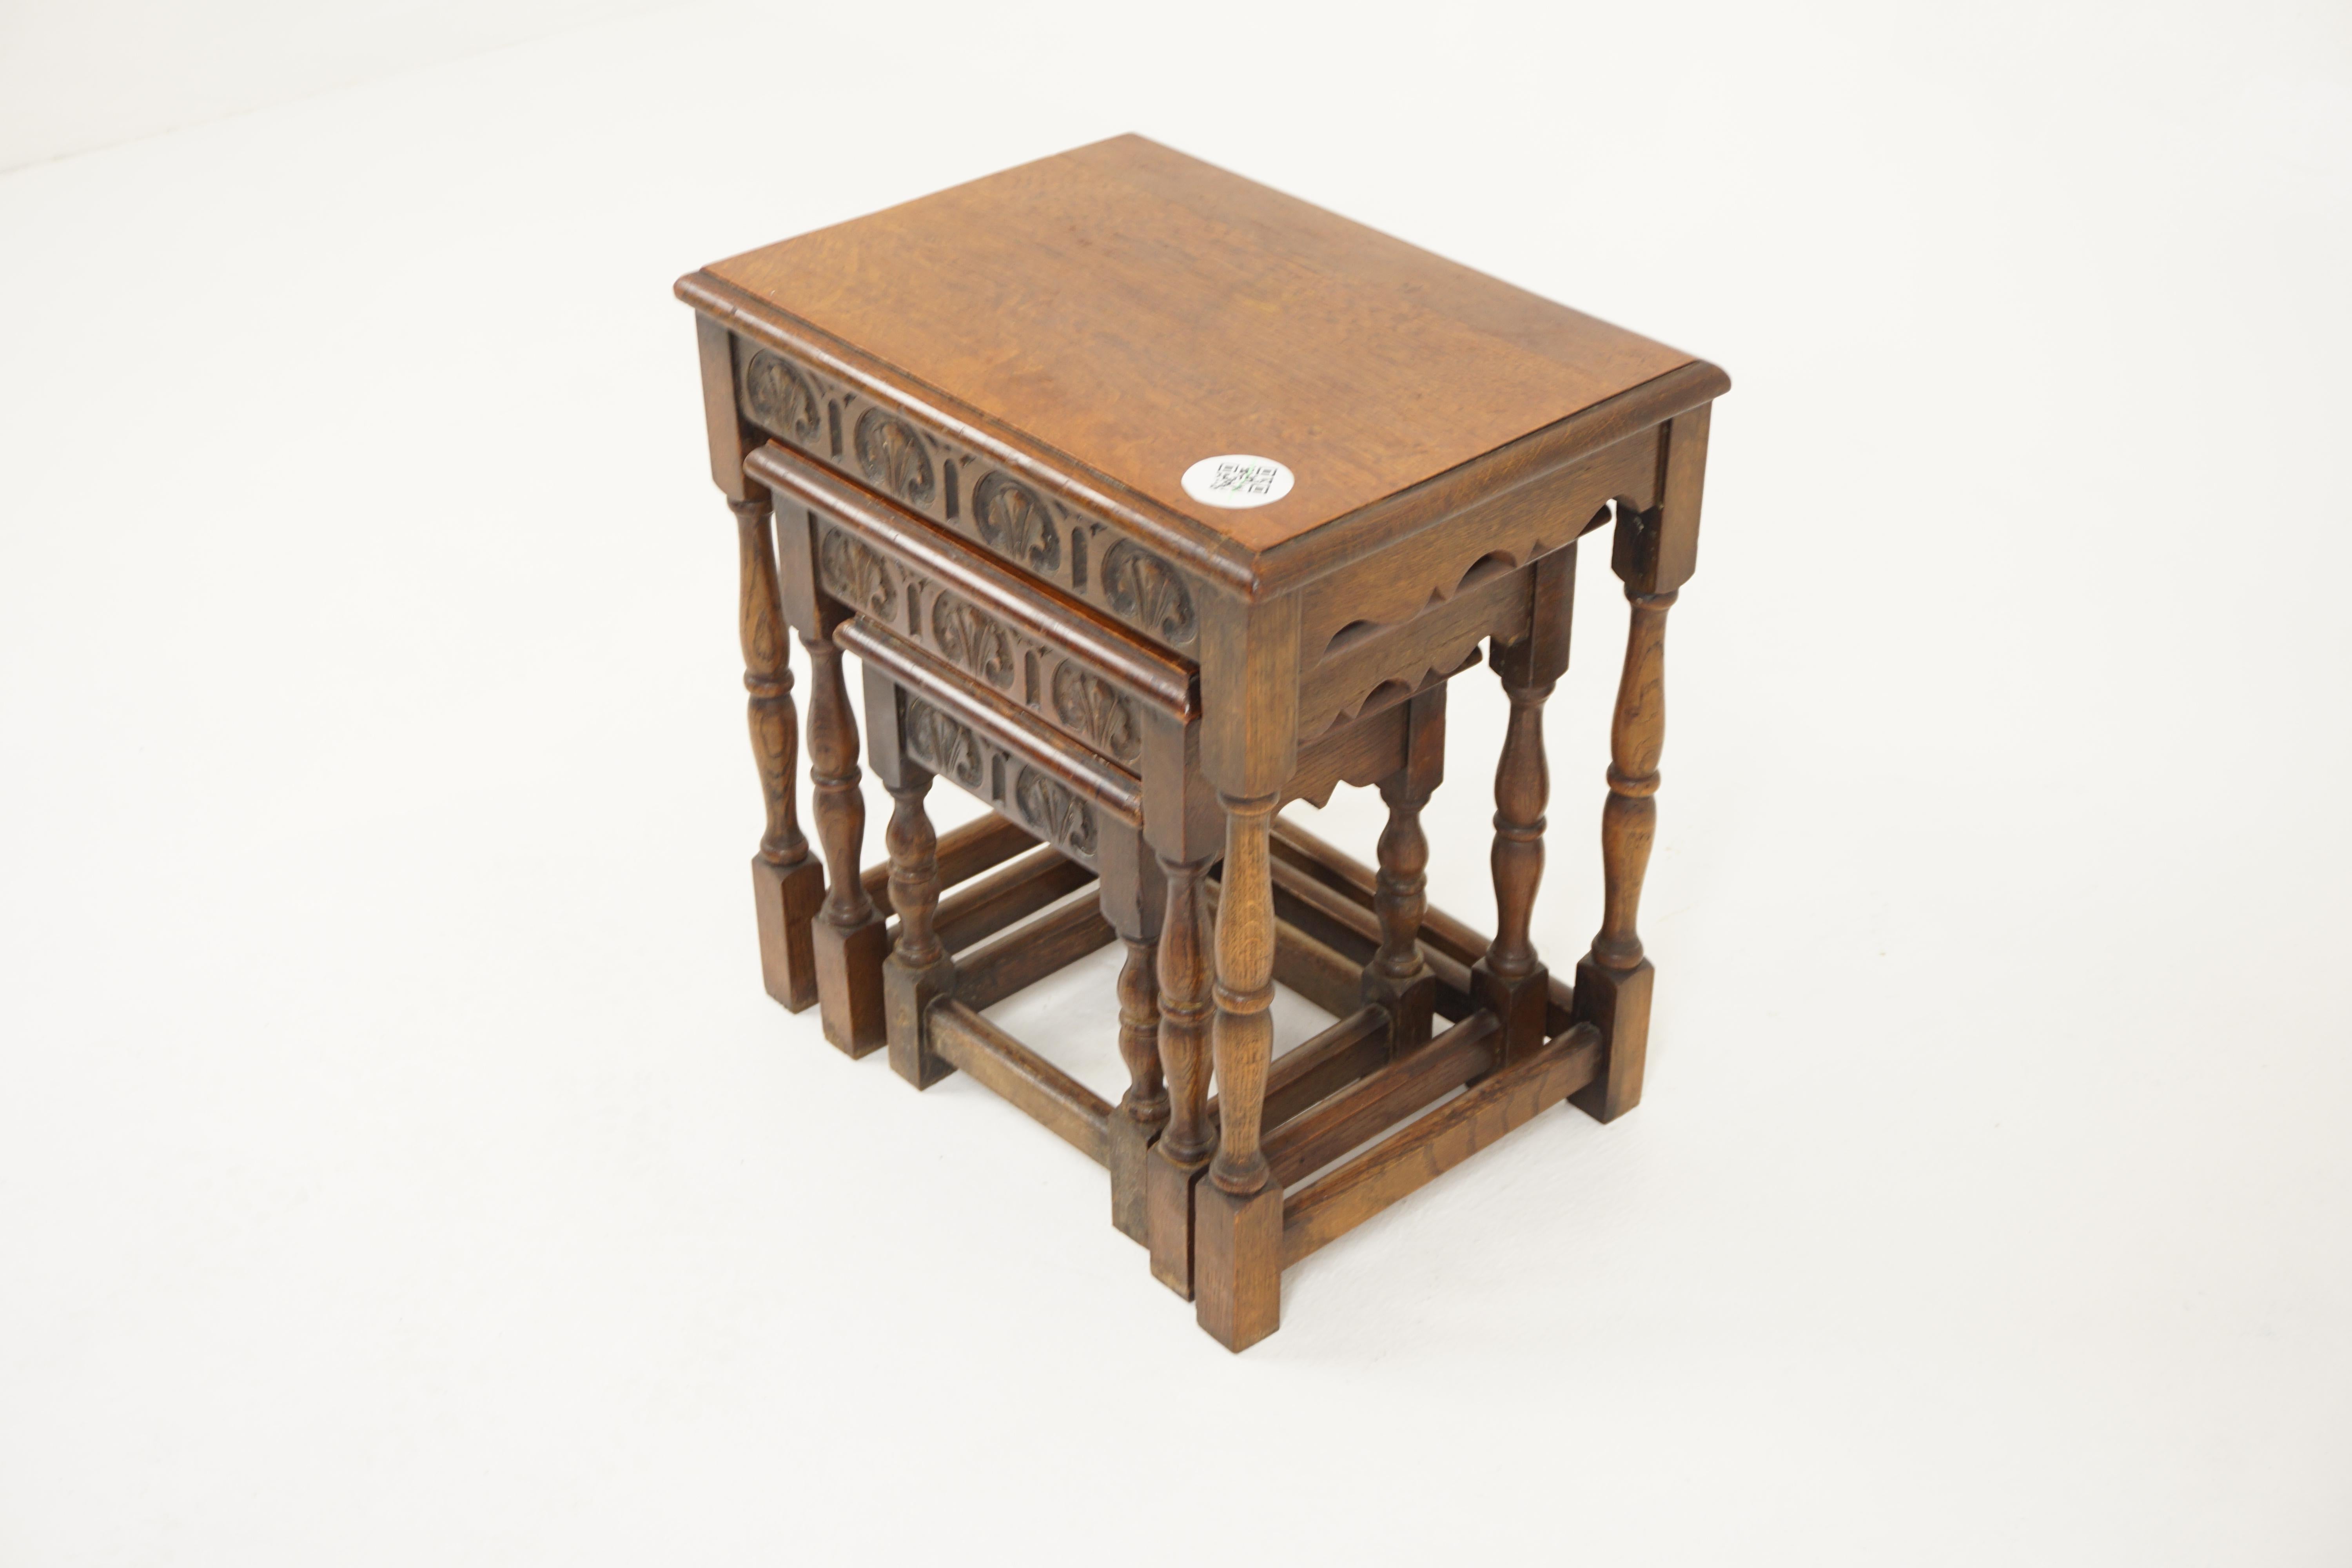 18th Century Style Set of 3 Oak nesting tables, Scotland 1930, H848

Scotland 1930
Solid Oak
Original Finish
Moulded top and sides
Carved frieze to all 3 tables
Standing on turned legs
Connected by oak stretchers
Please note middle table